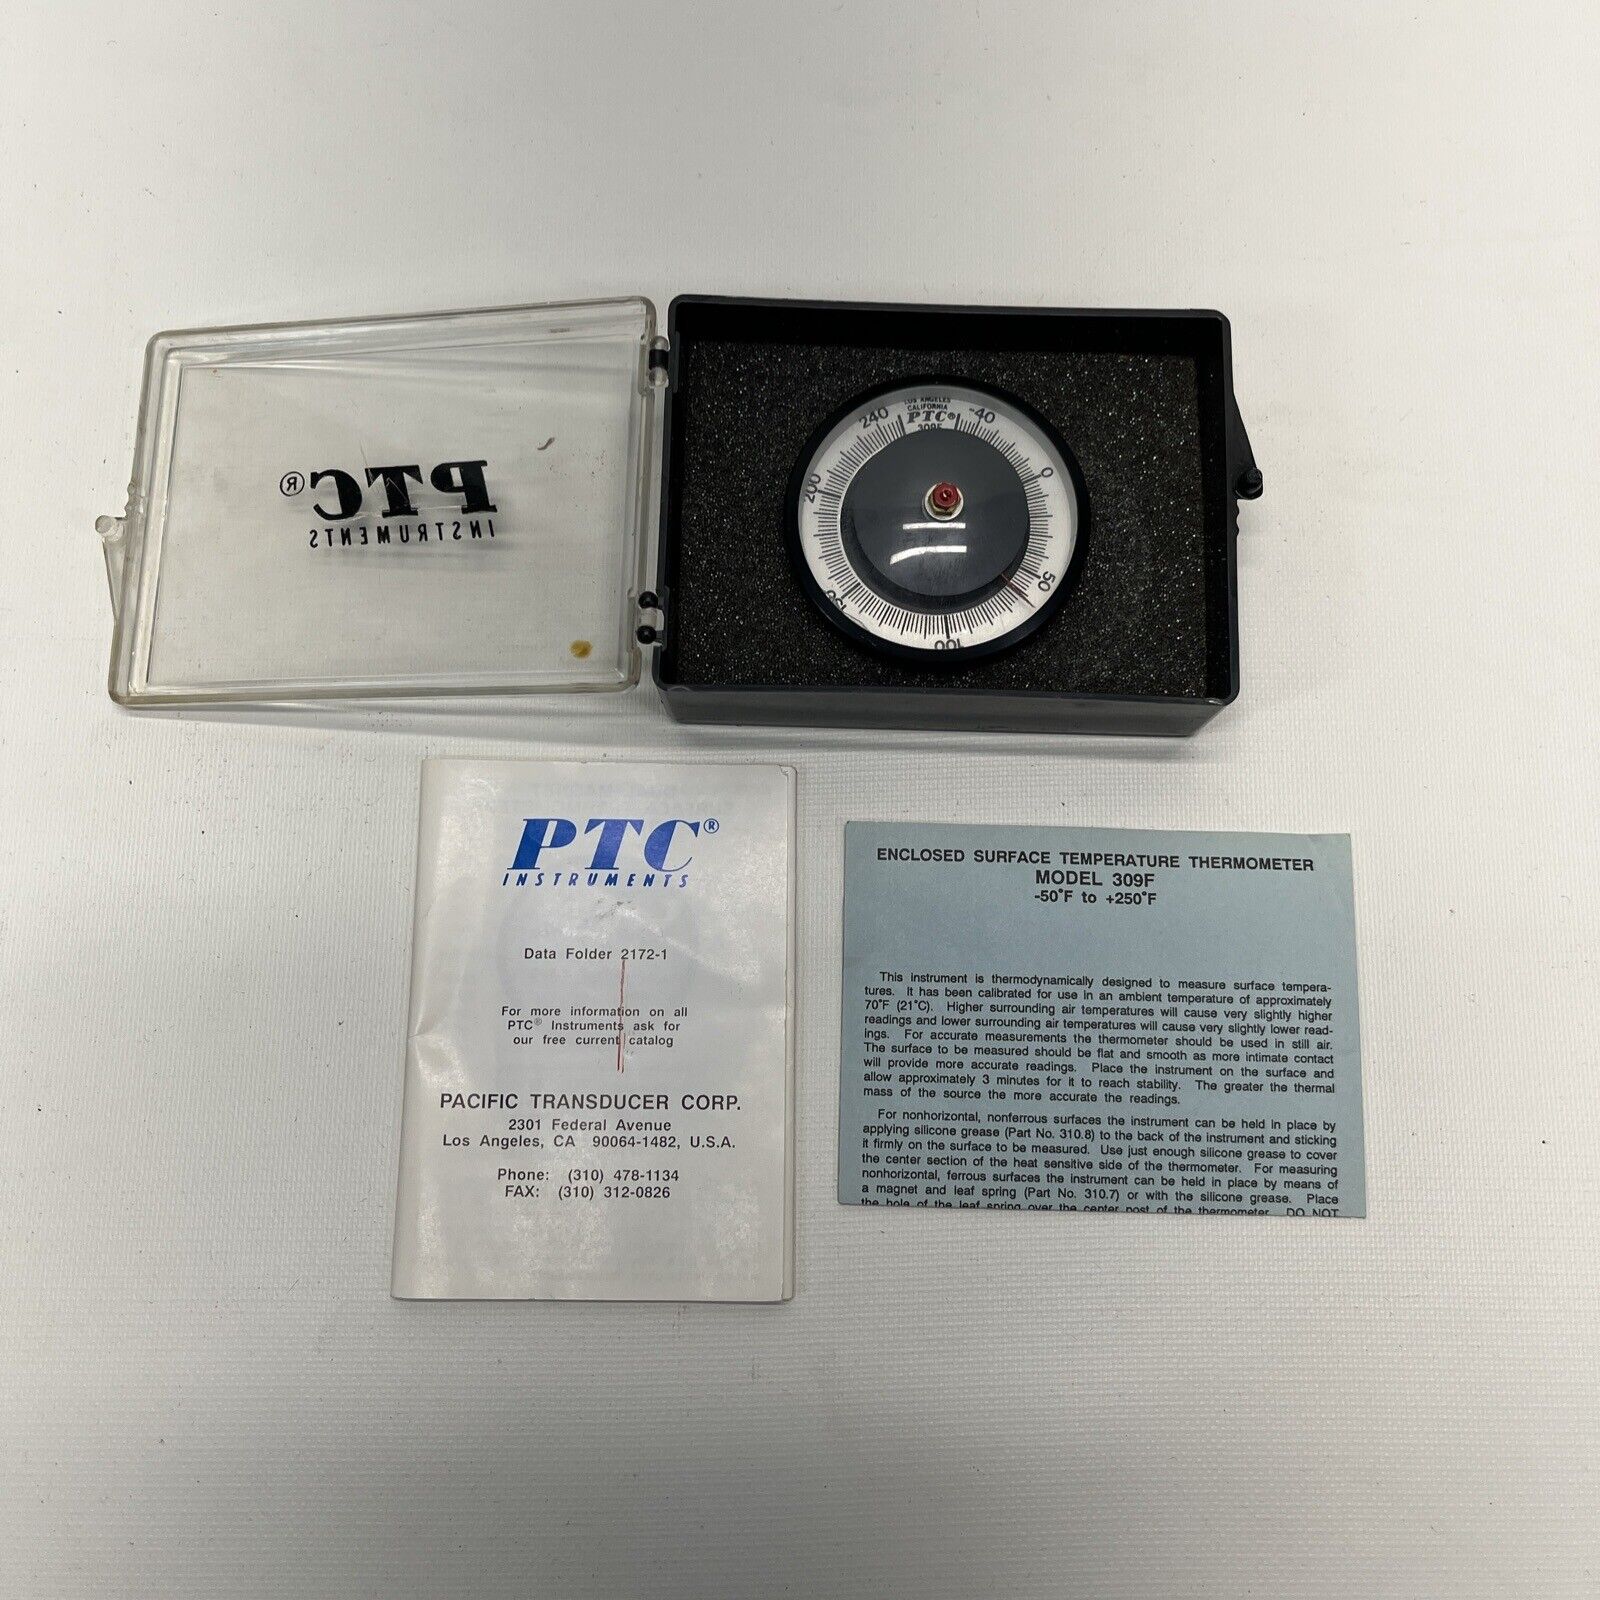 Pacific Transducer Corp Surface Temperature Thermometer Model 309F -50°F - 250°F